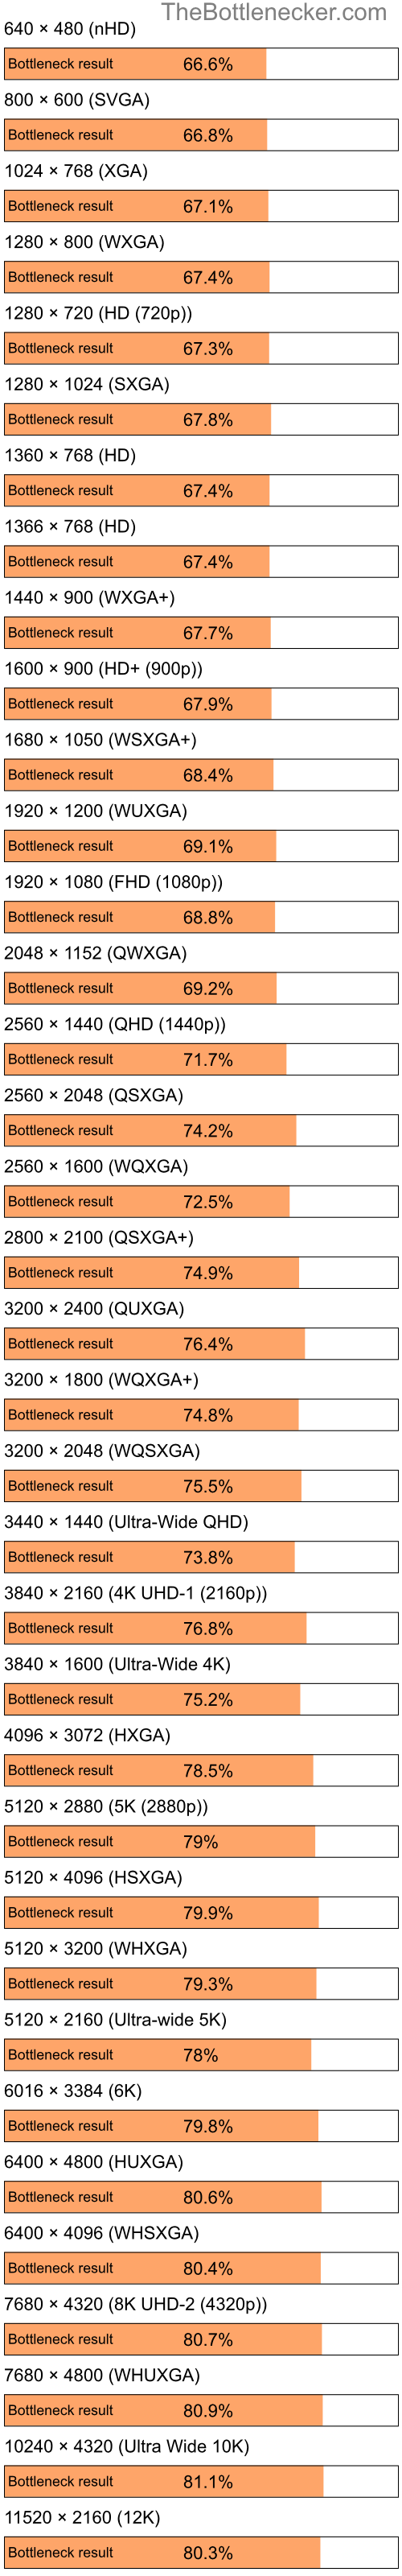 Bottleneck results by resolution for Intel Atom Z520 and AMD Mobility Radeon 4100 in7 Days to Die